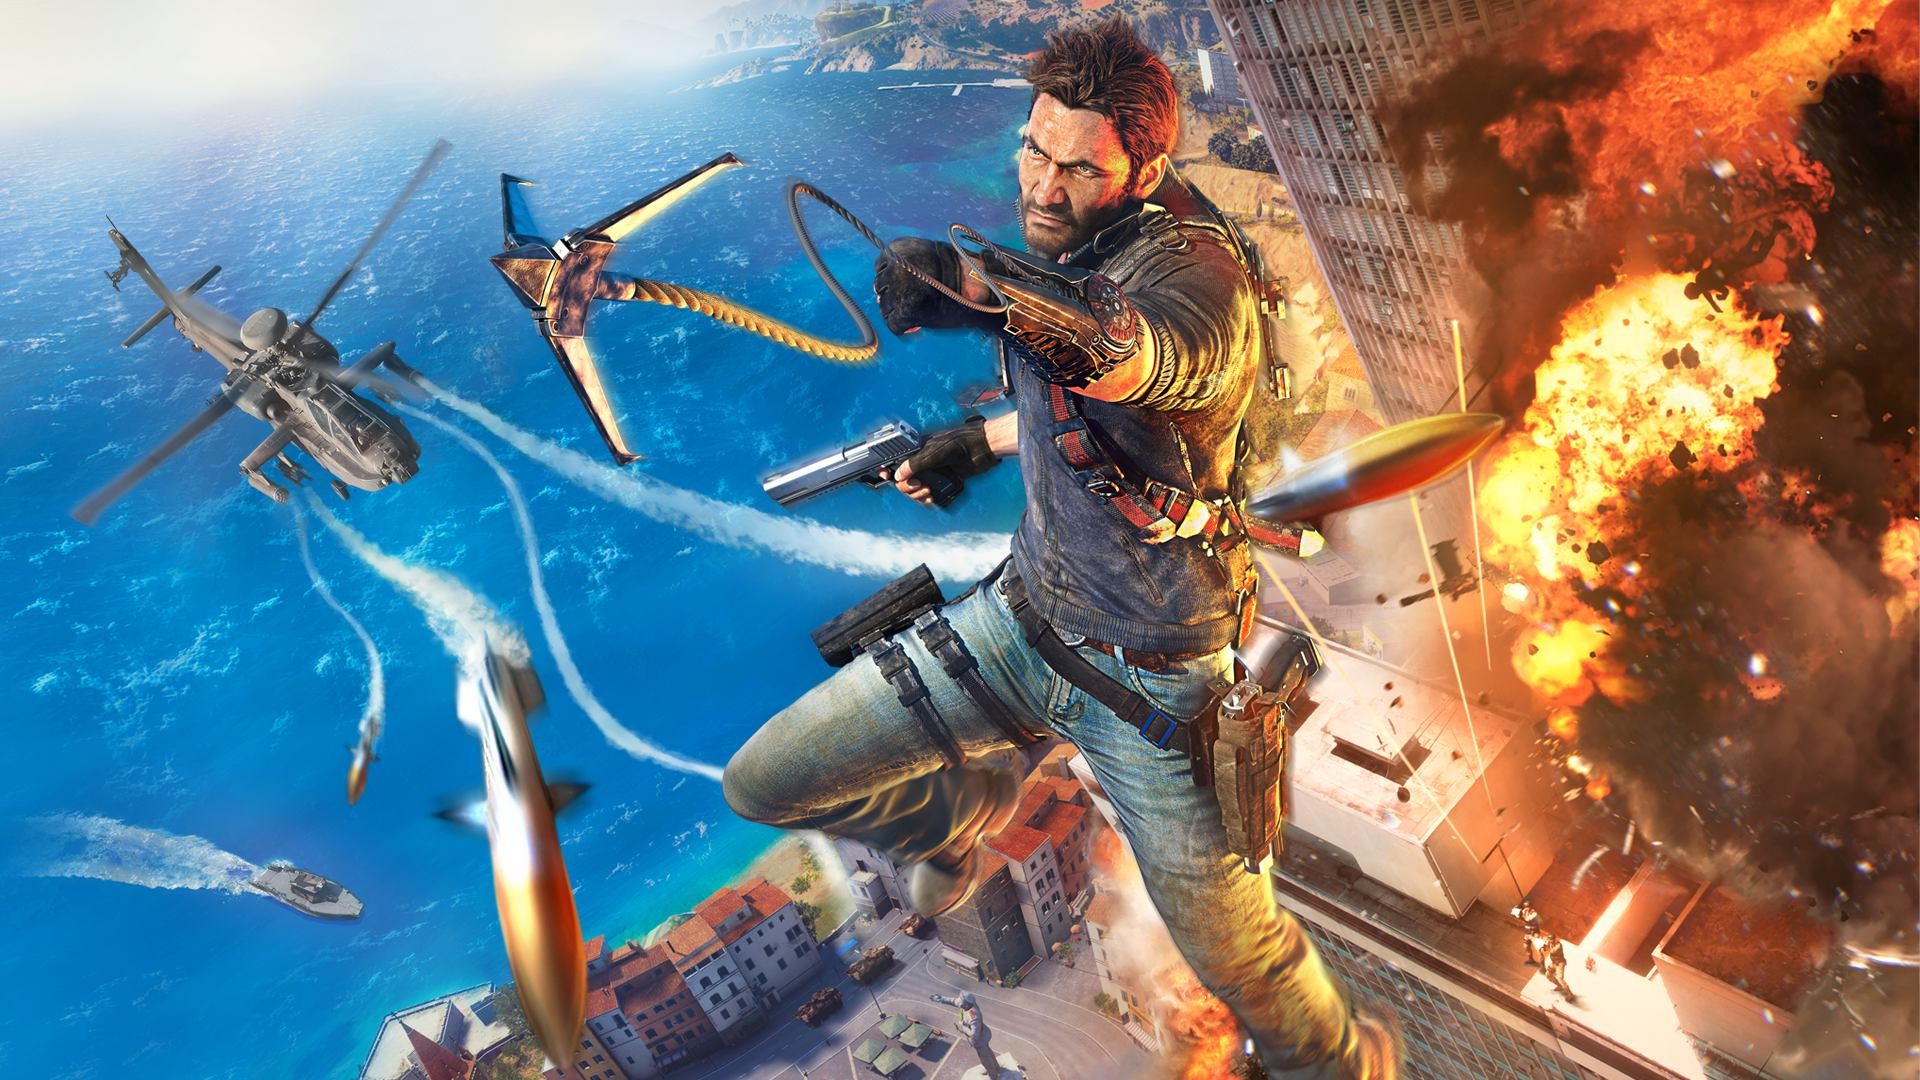 General 1920x1080 Video Game Heroes Just Cause 3 Rico Rodriguez video game men video game characters